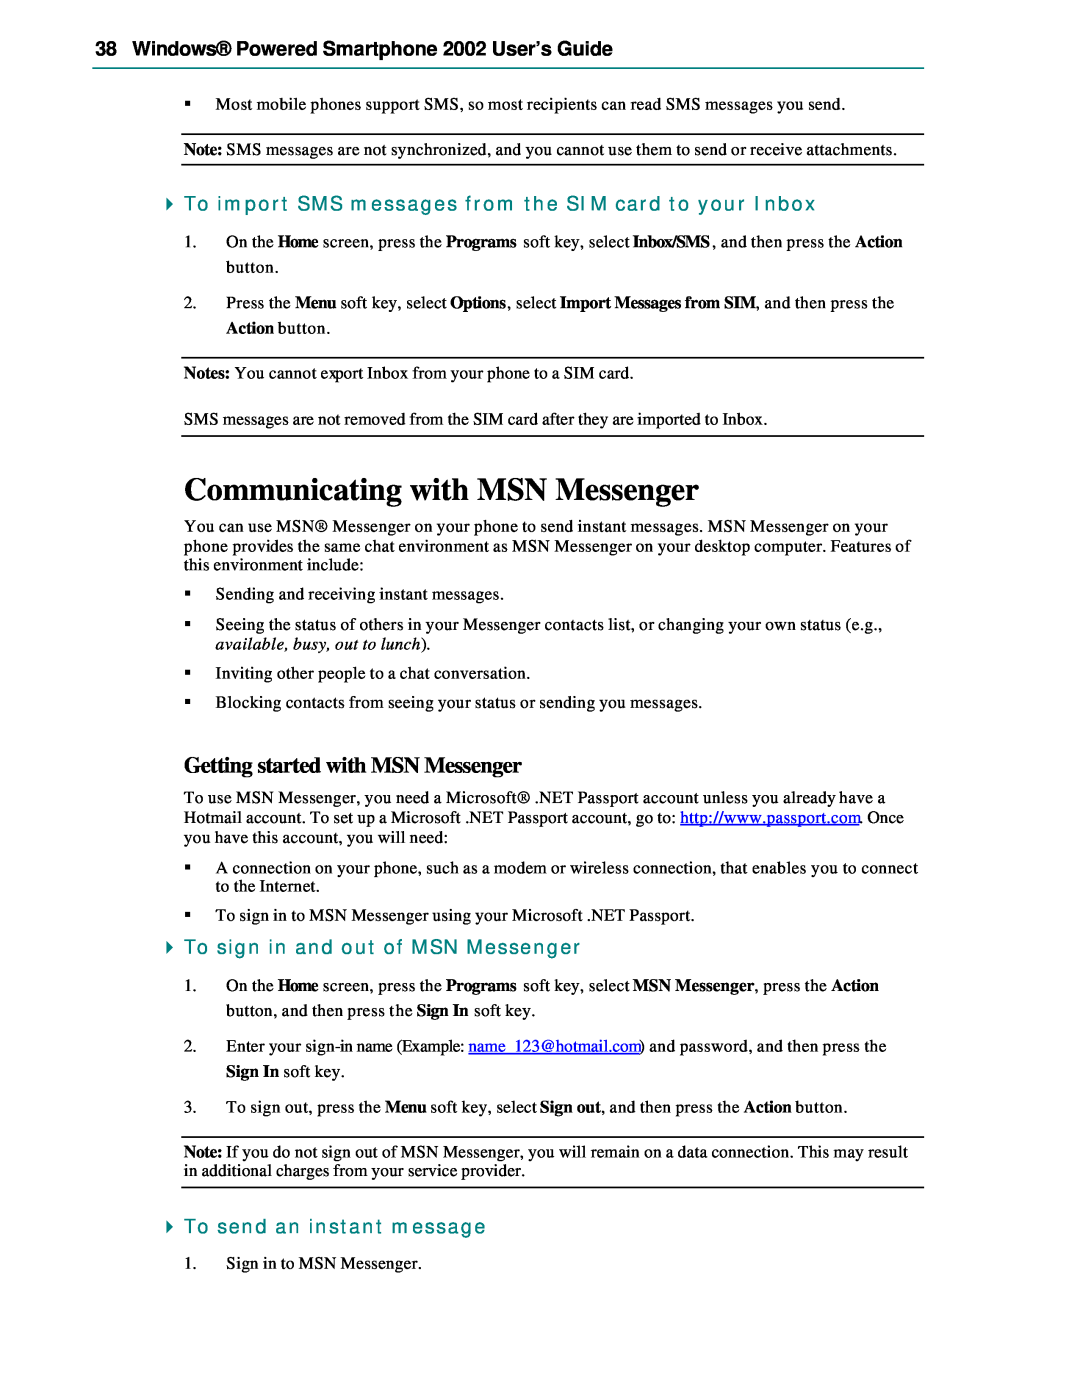 Microsoft Smartphone 2002 Communicating with MSN Messenger, Getting started with MSN Messenger, To send an instant message 